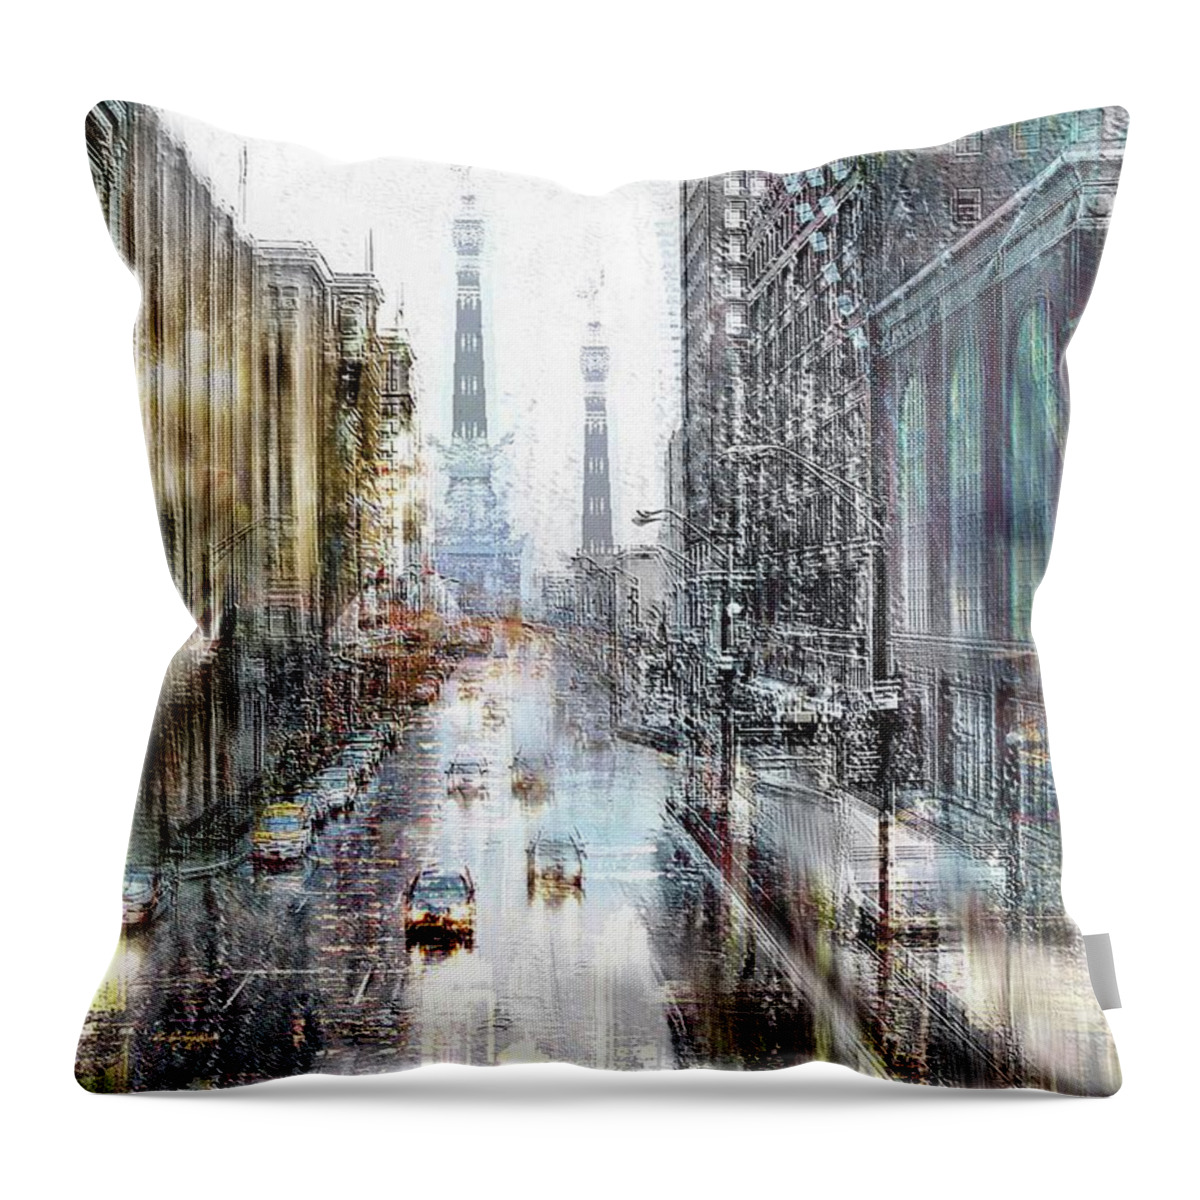 Indianapolis Throw Pillow featuring the digital art Indianapolis 2 by Looking Glass Images